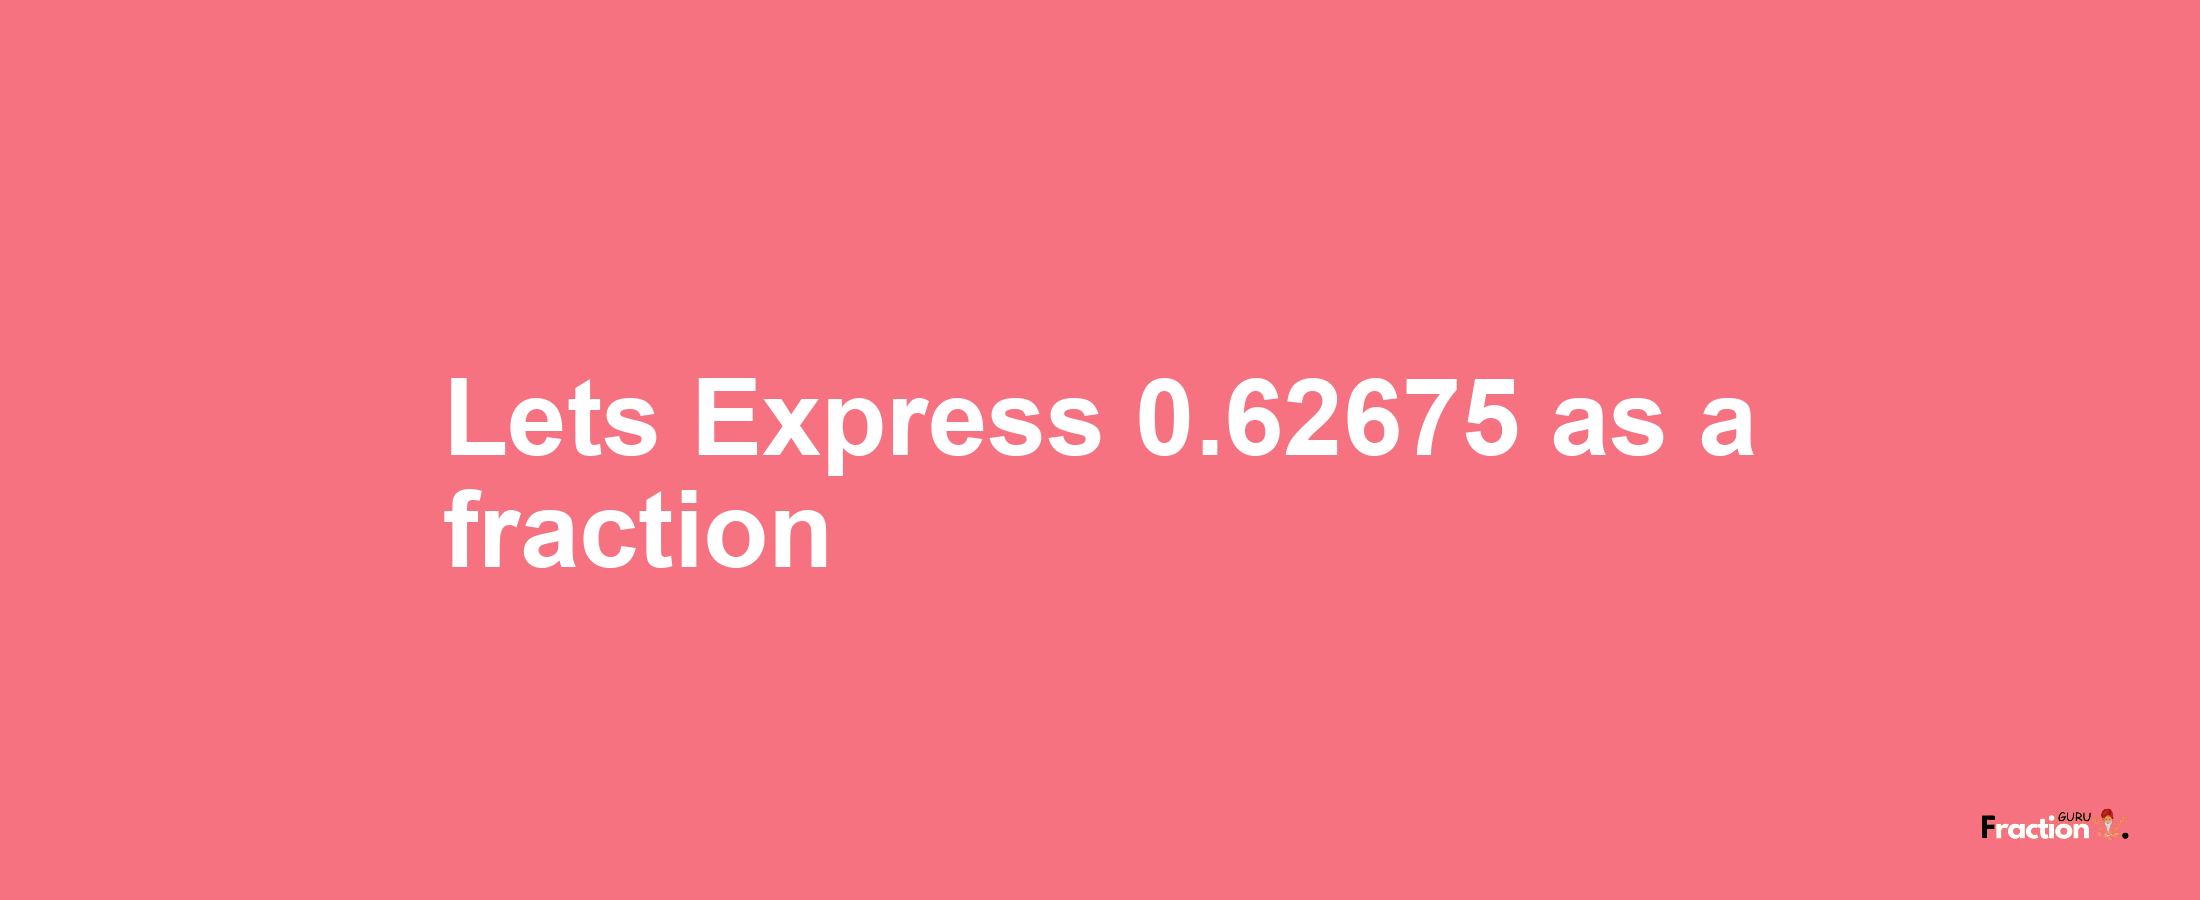 Lets Express 0.62675 as afraction